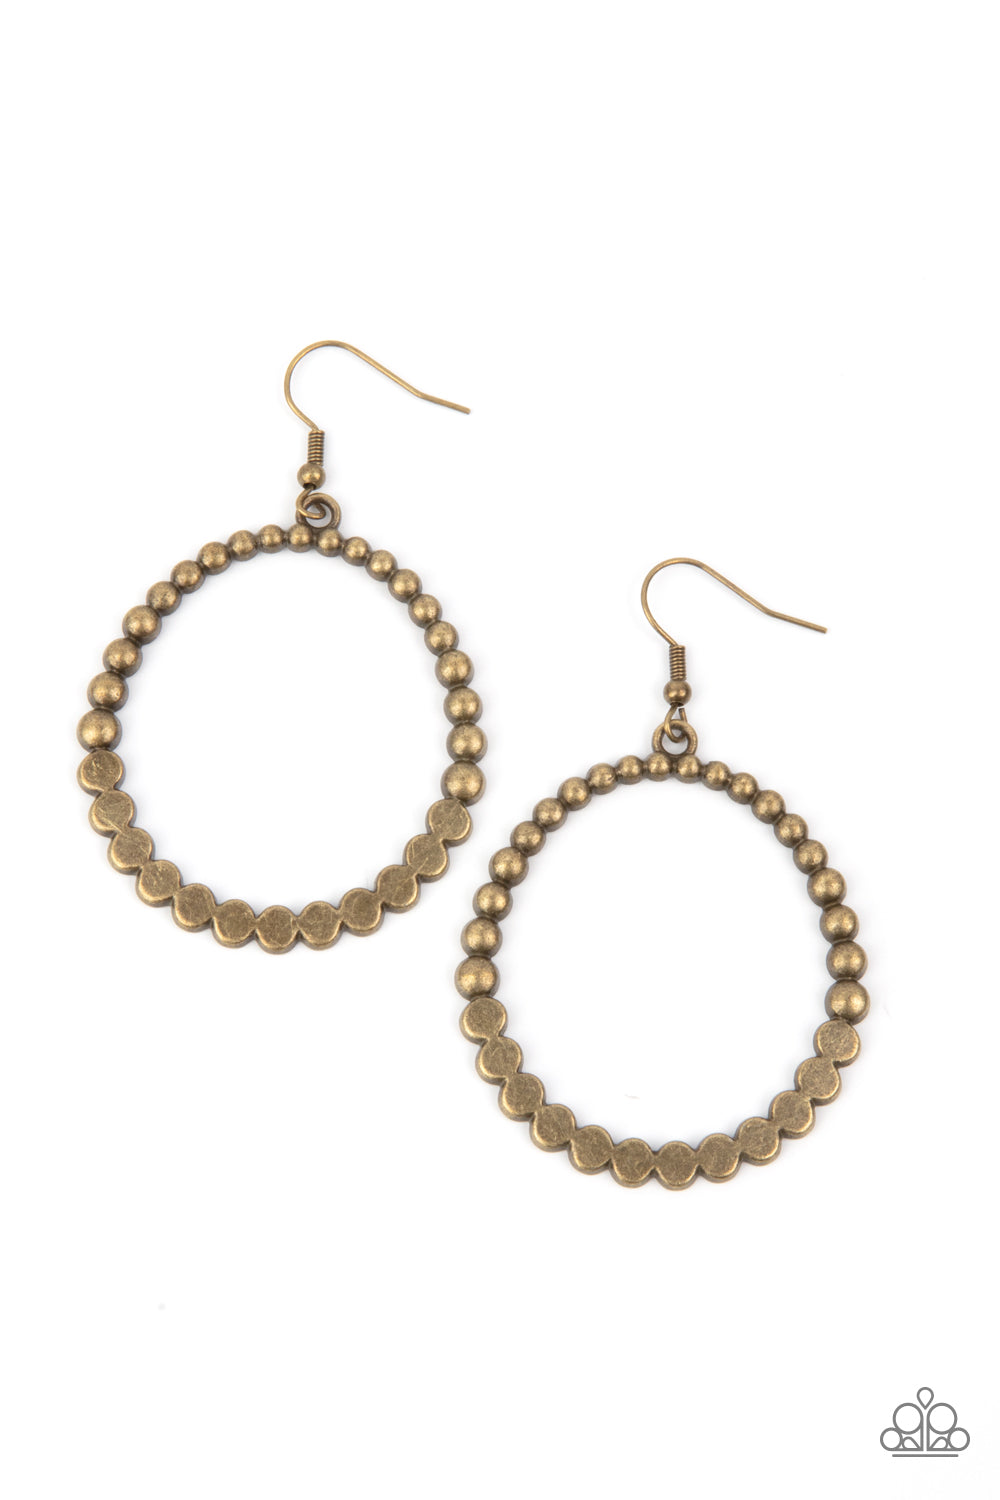 Antiqued brass studs join with flattened brass studs, creating a rustic hoop